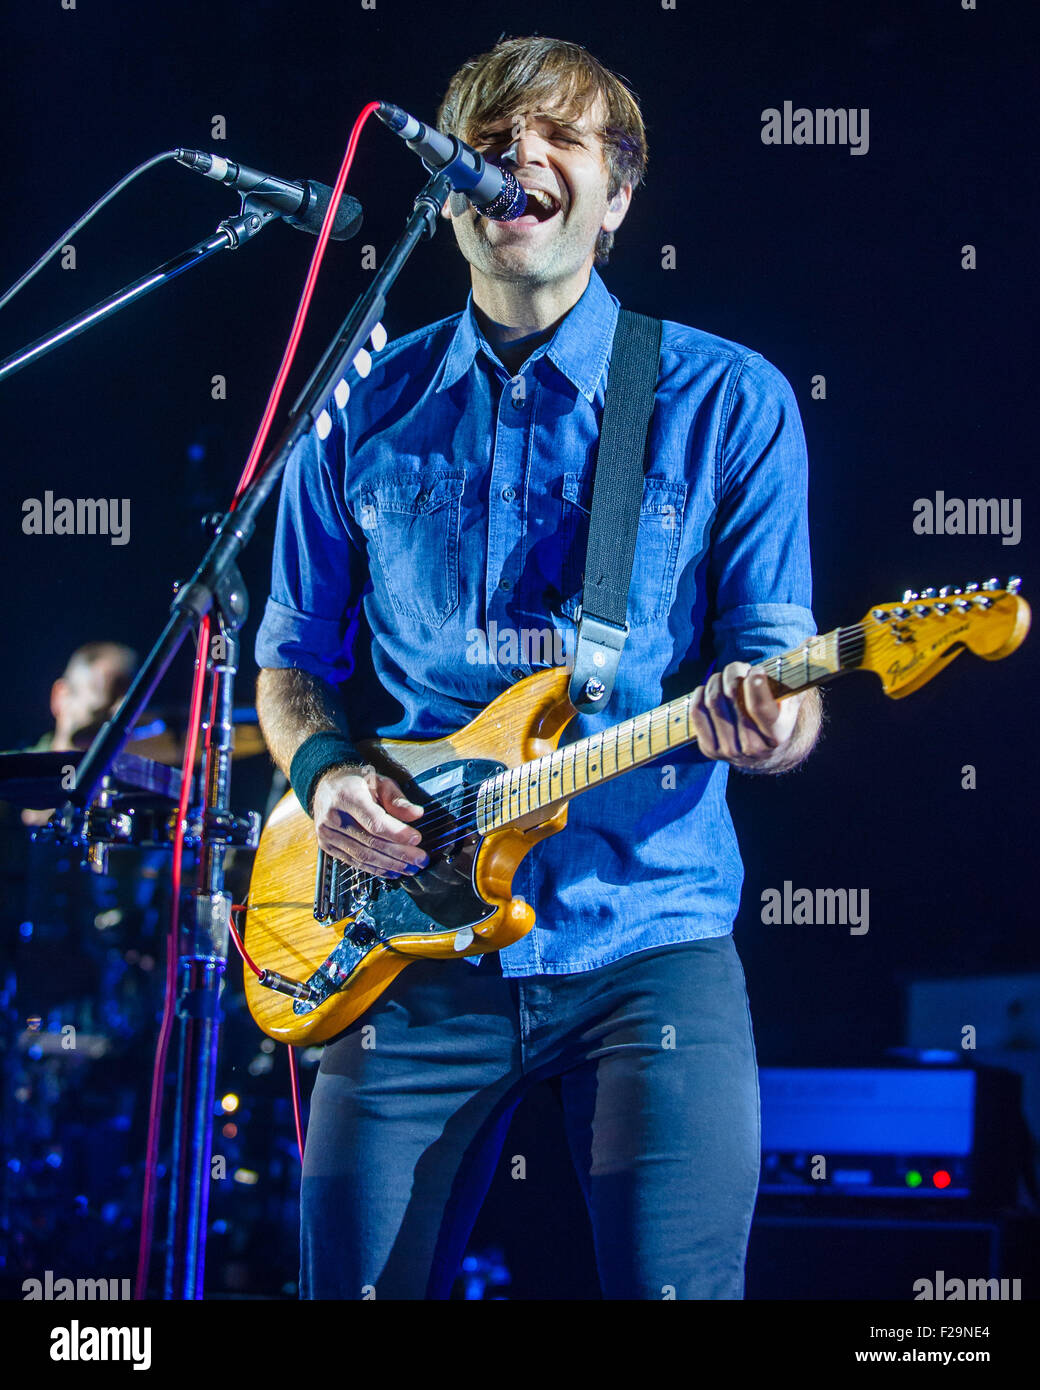 Columbia, MD, USA. 13th Sep, 2015. BEN GIBBARD of Death Cab For Cutie performs at Merriweather Post Pavilion in Columbia, MD. © Kyle Gustafson/ZUMA Wire/Alamy Live News Stock Photo